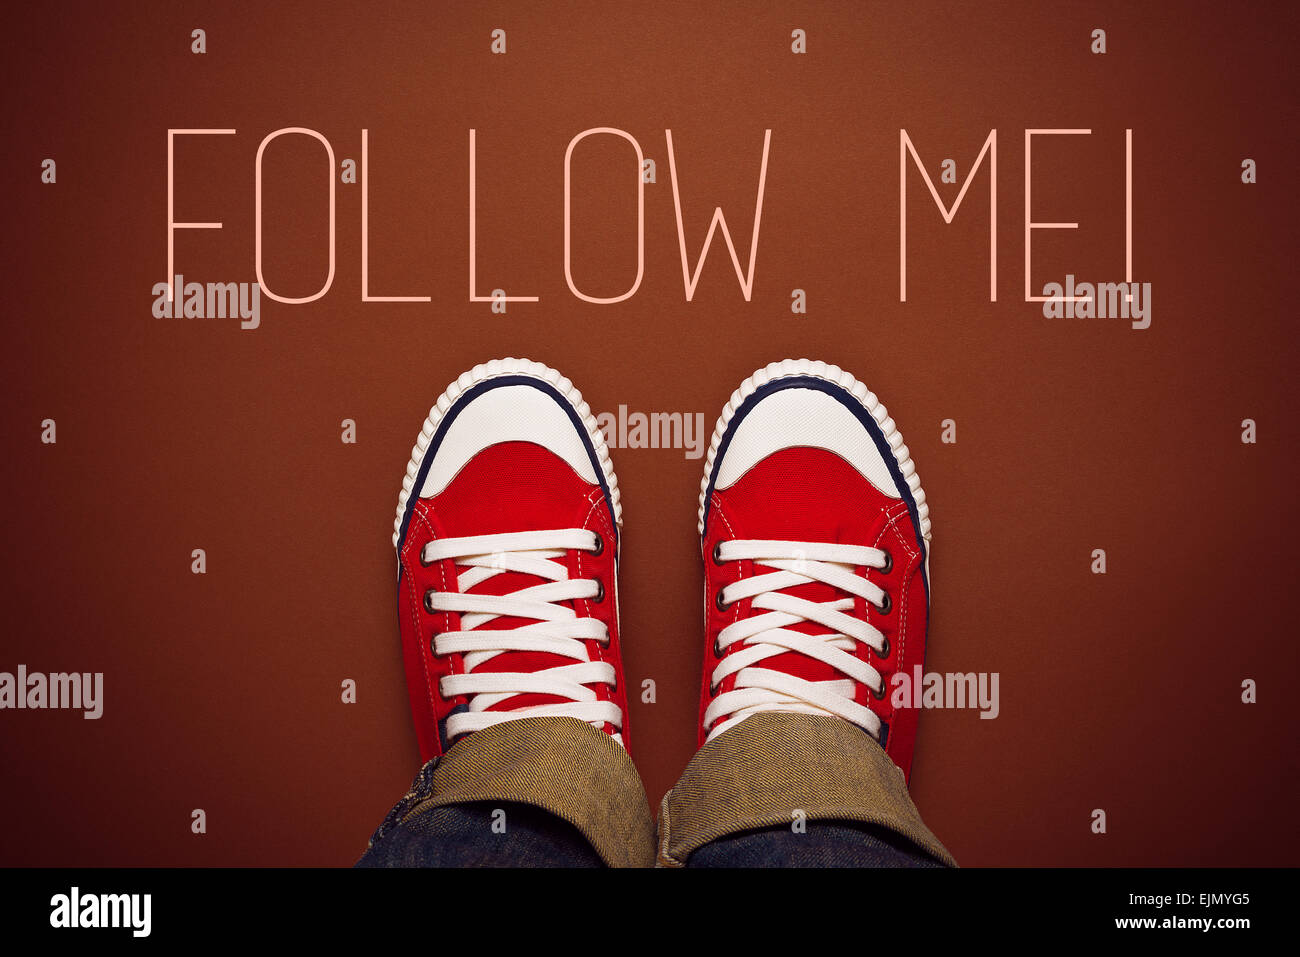 Follow Me Request Concept for Social Networking on Internet with Young Person in Red Sneakers from Above. Stock Photo